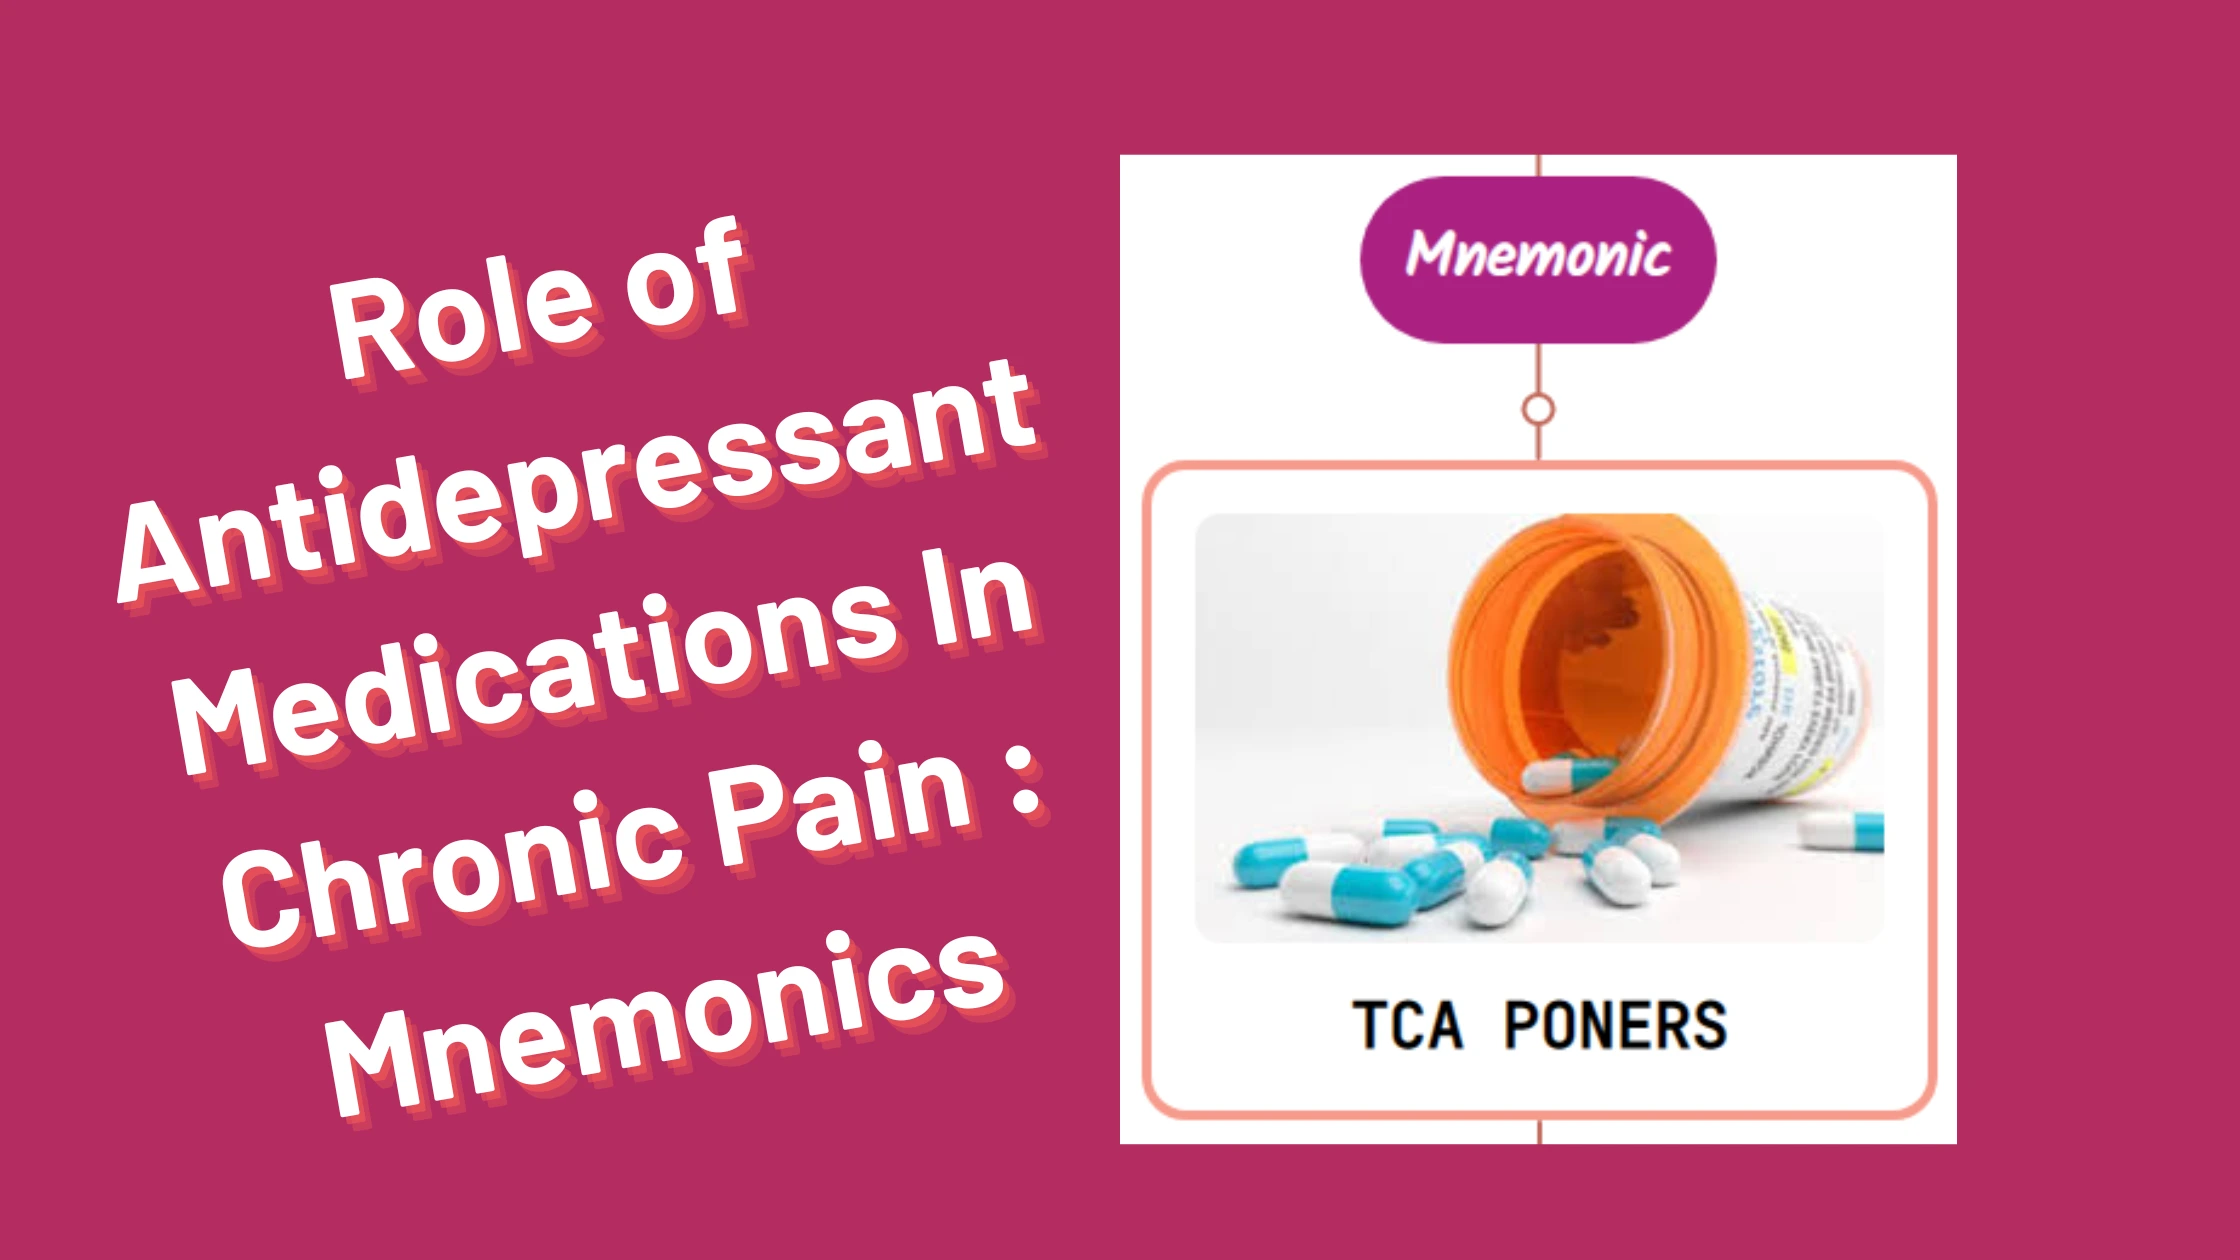 You are currently viewing Role of Antidepressant Medications In Chronic Pain : Mnemonics